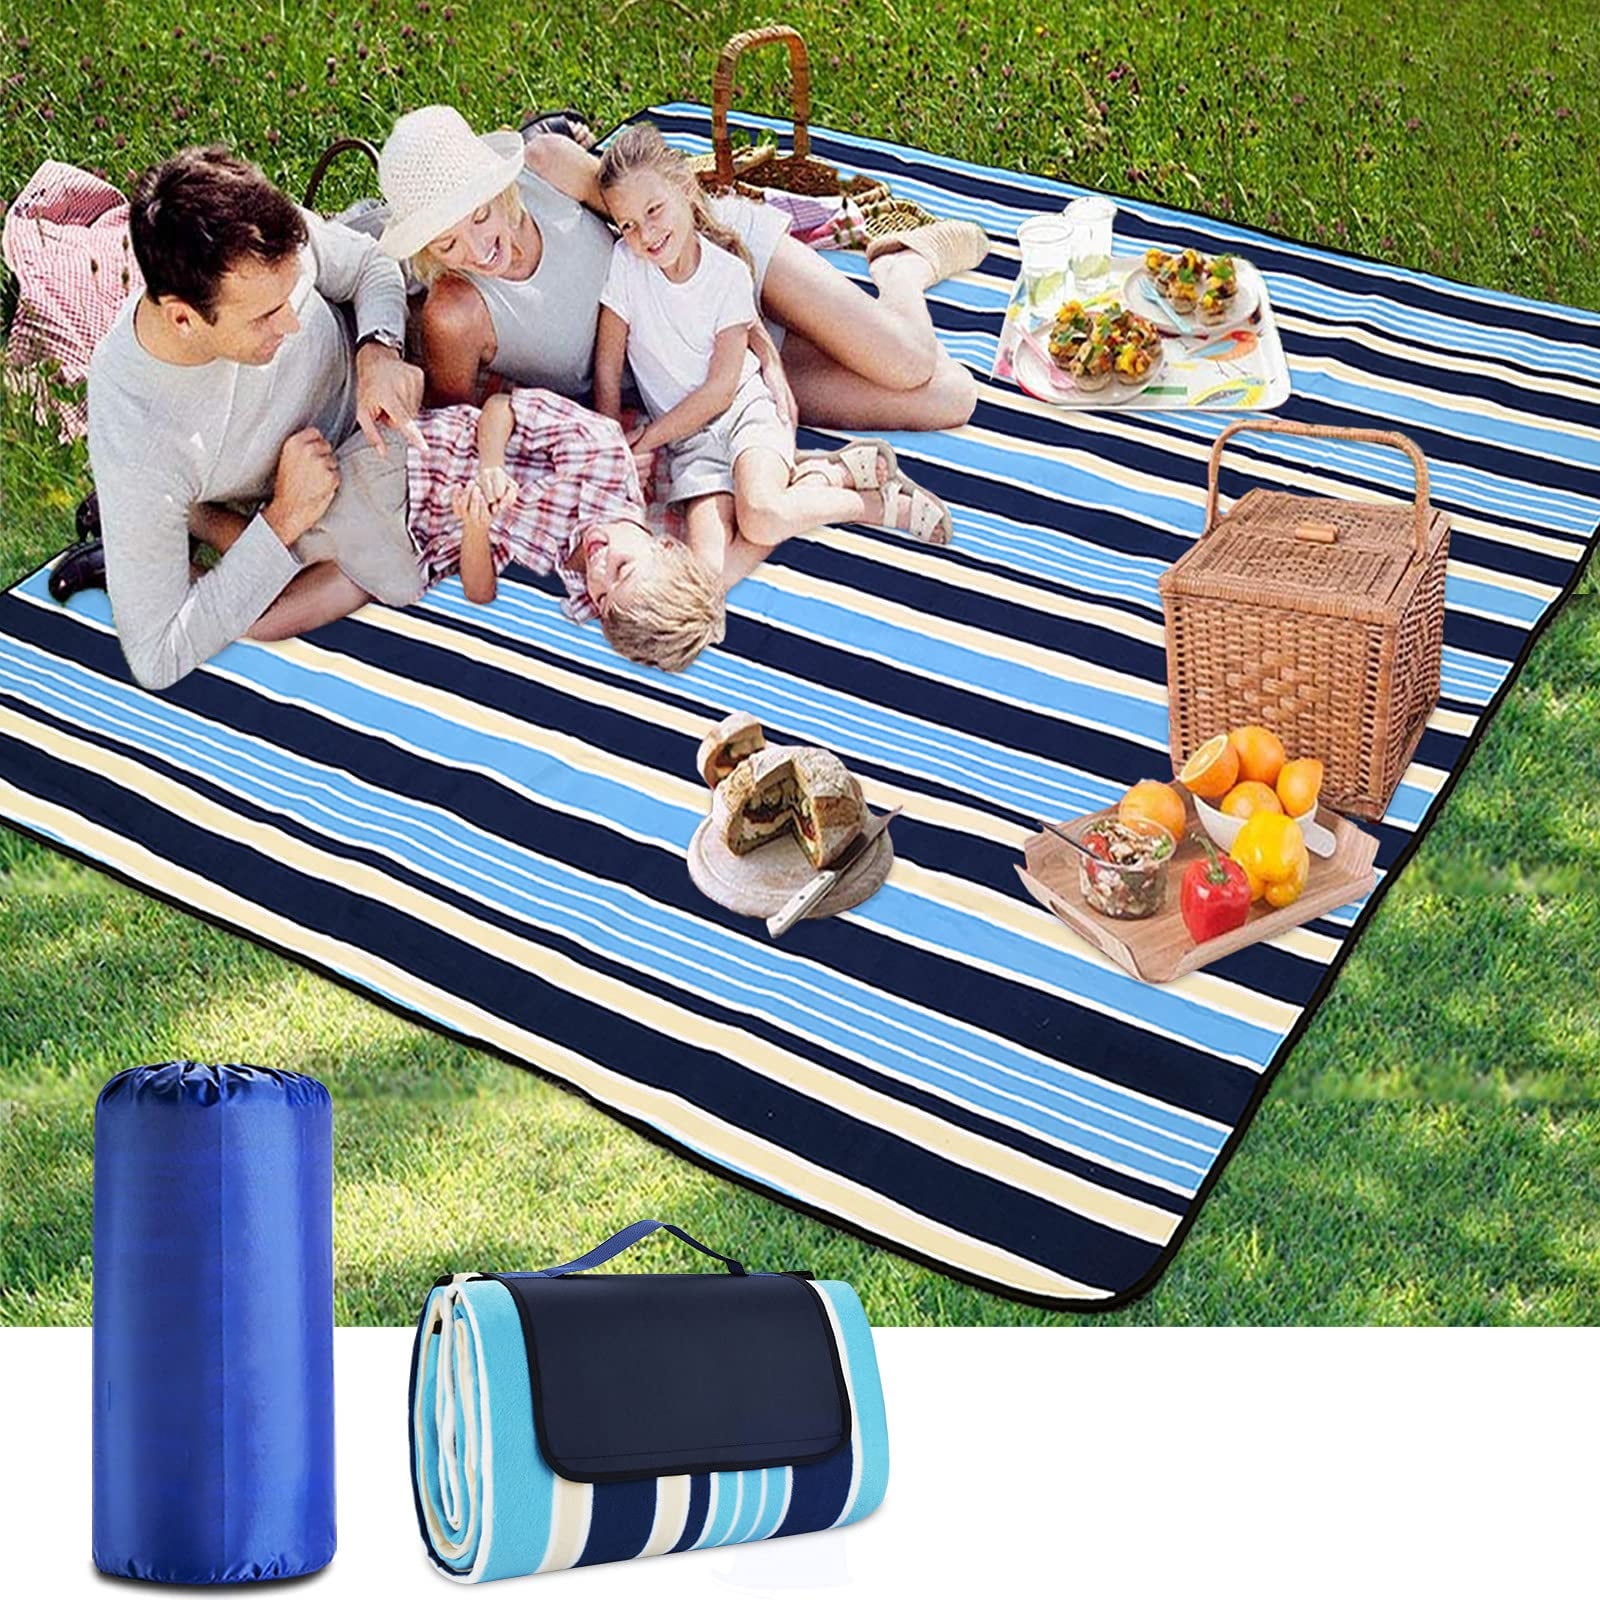 Extra Large No Sand Beach Mat Rug Picnic Blanket Waterproof Camping Travel Pack 